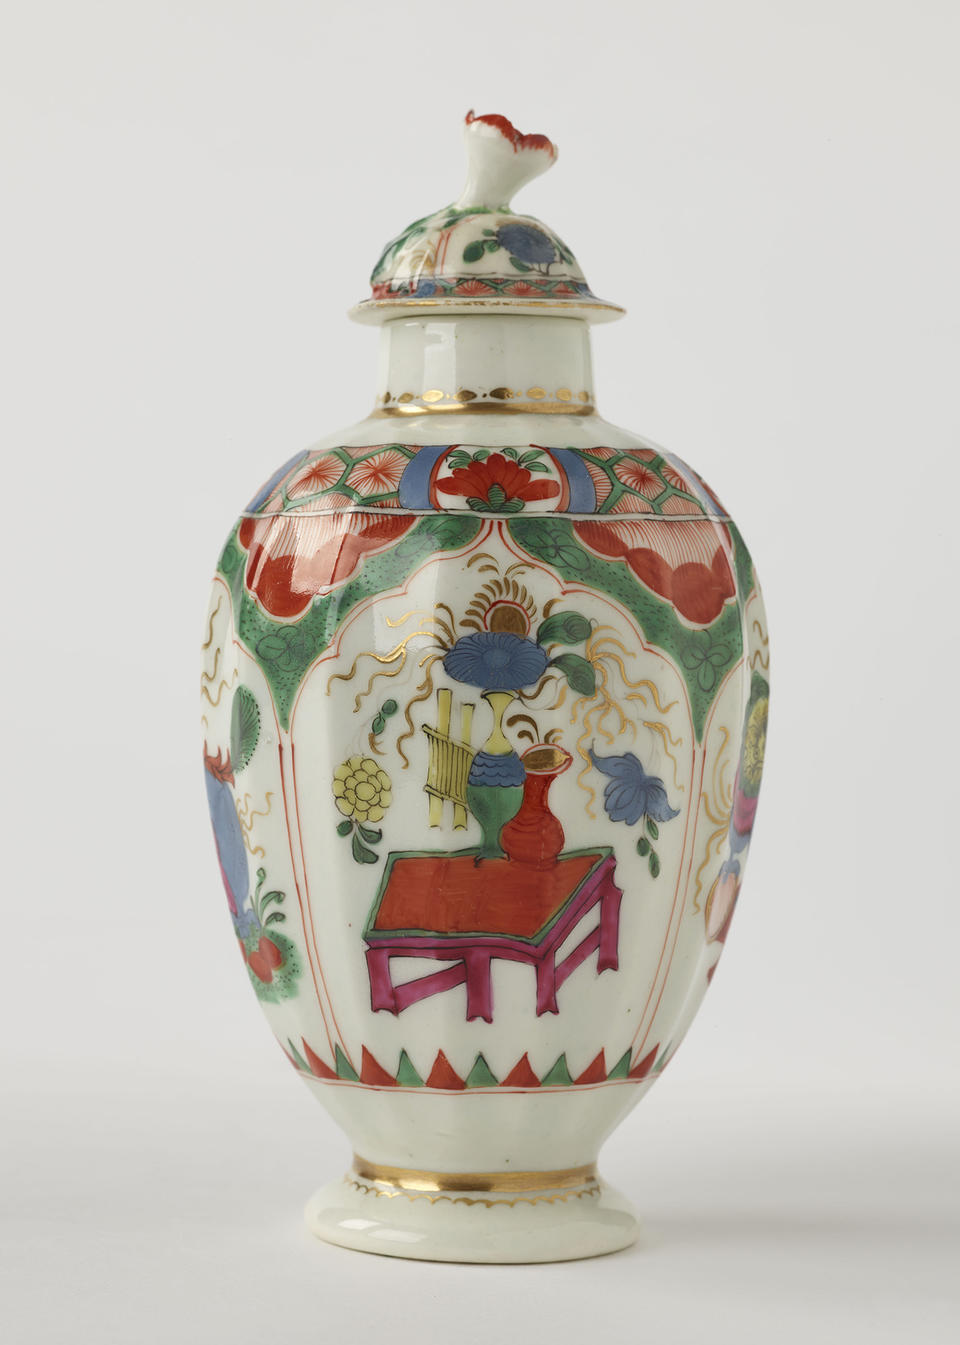 A porcelain tea caddy with a lid and green, red, blue, pink, yellow and gilded decorations. The finial is a sculptural flower white, red and green